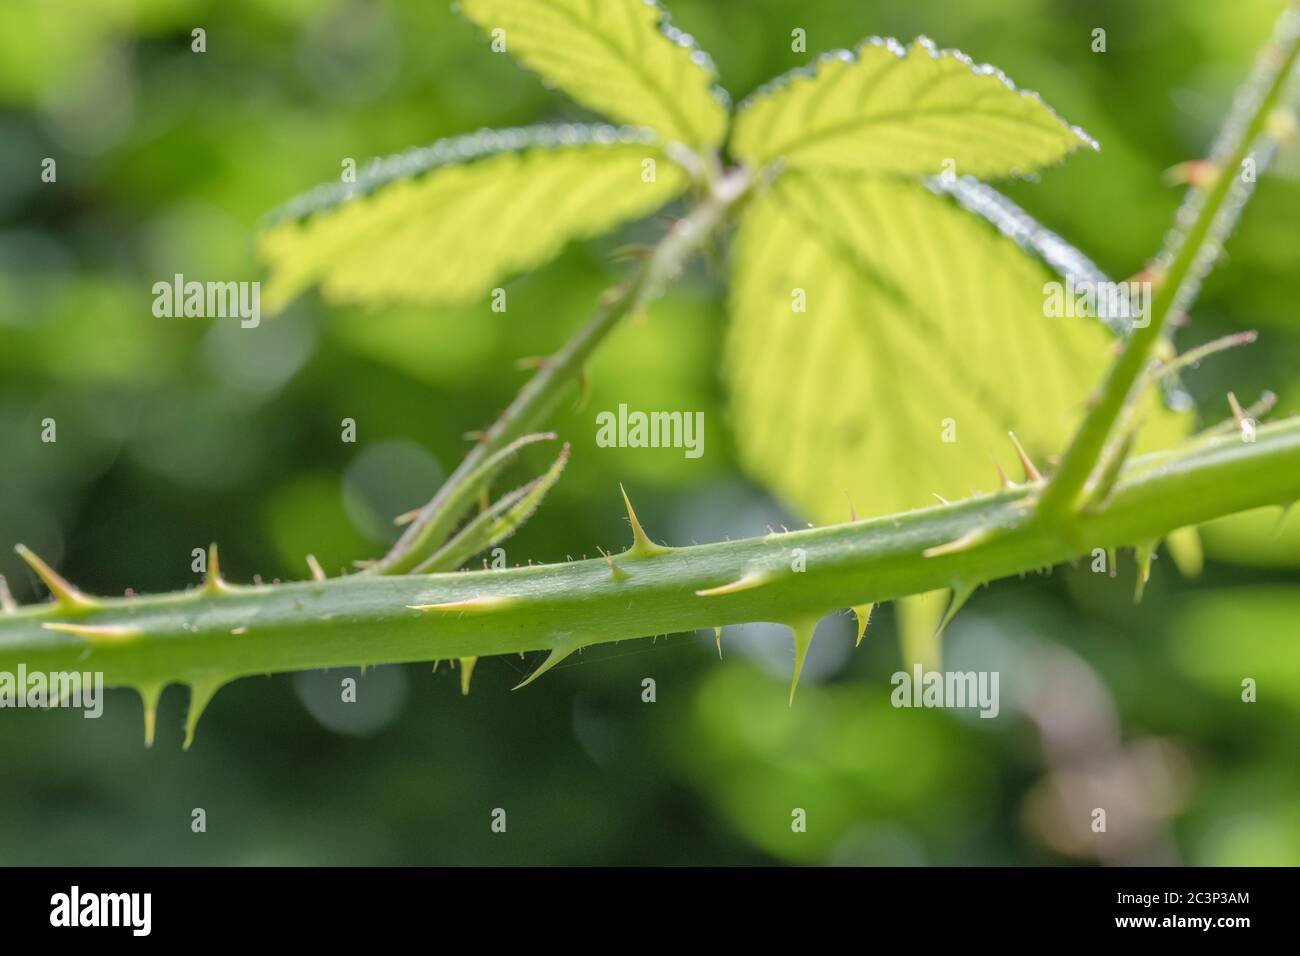 Close-up shot of a Bramble / Rubus fruticosus stem, or came, showing sharp thorns / prickles. For sharp, plant defences, painful, prickly personality. Stock Photo